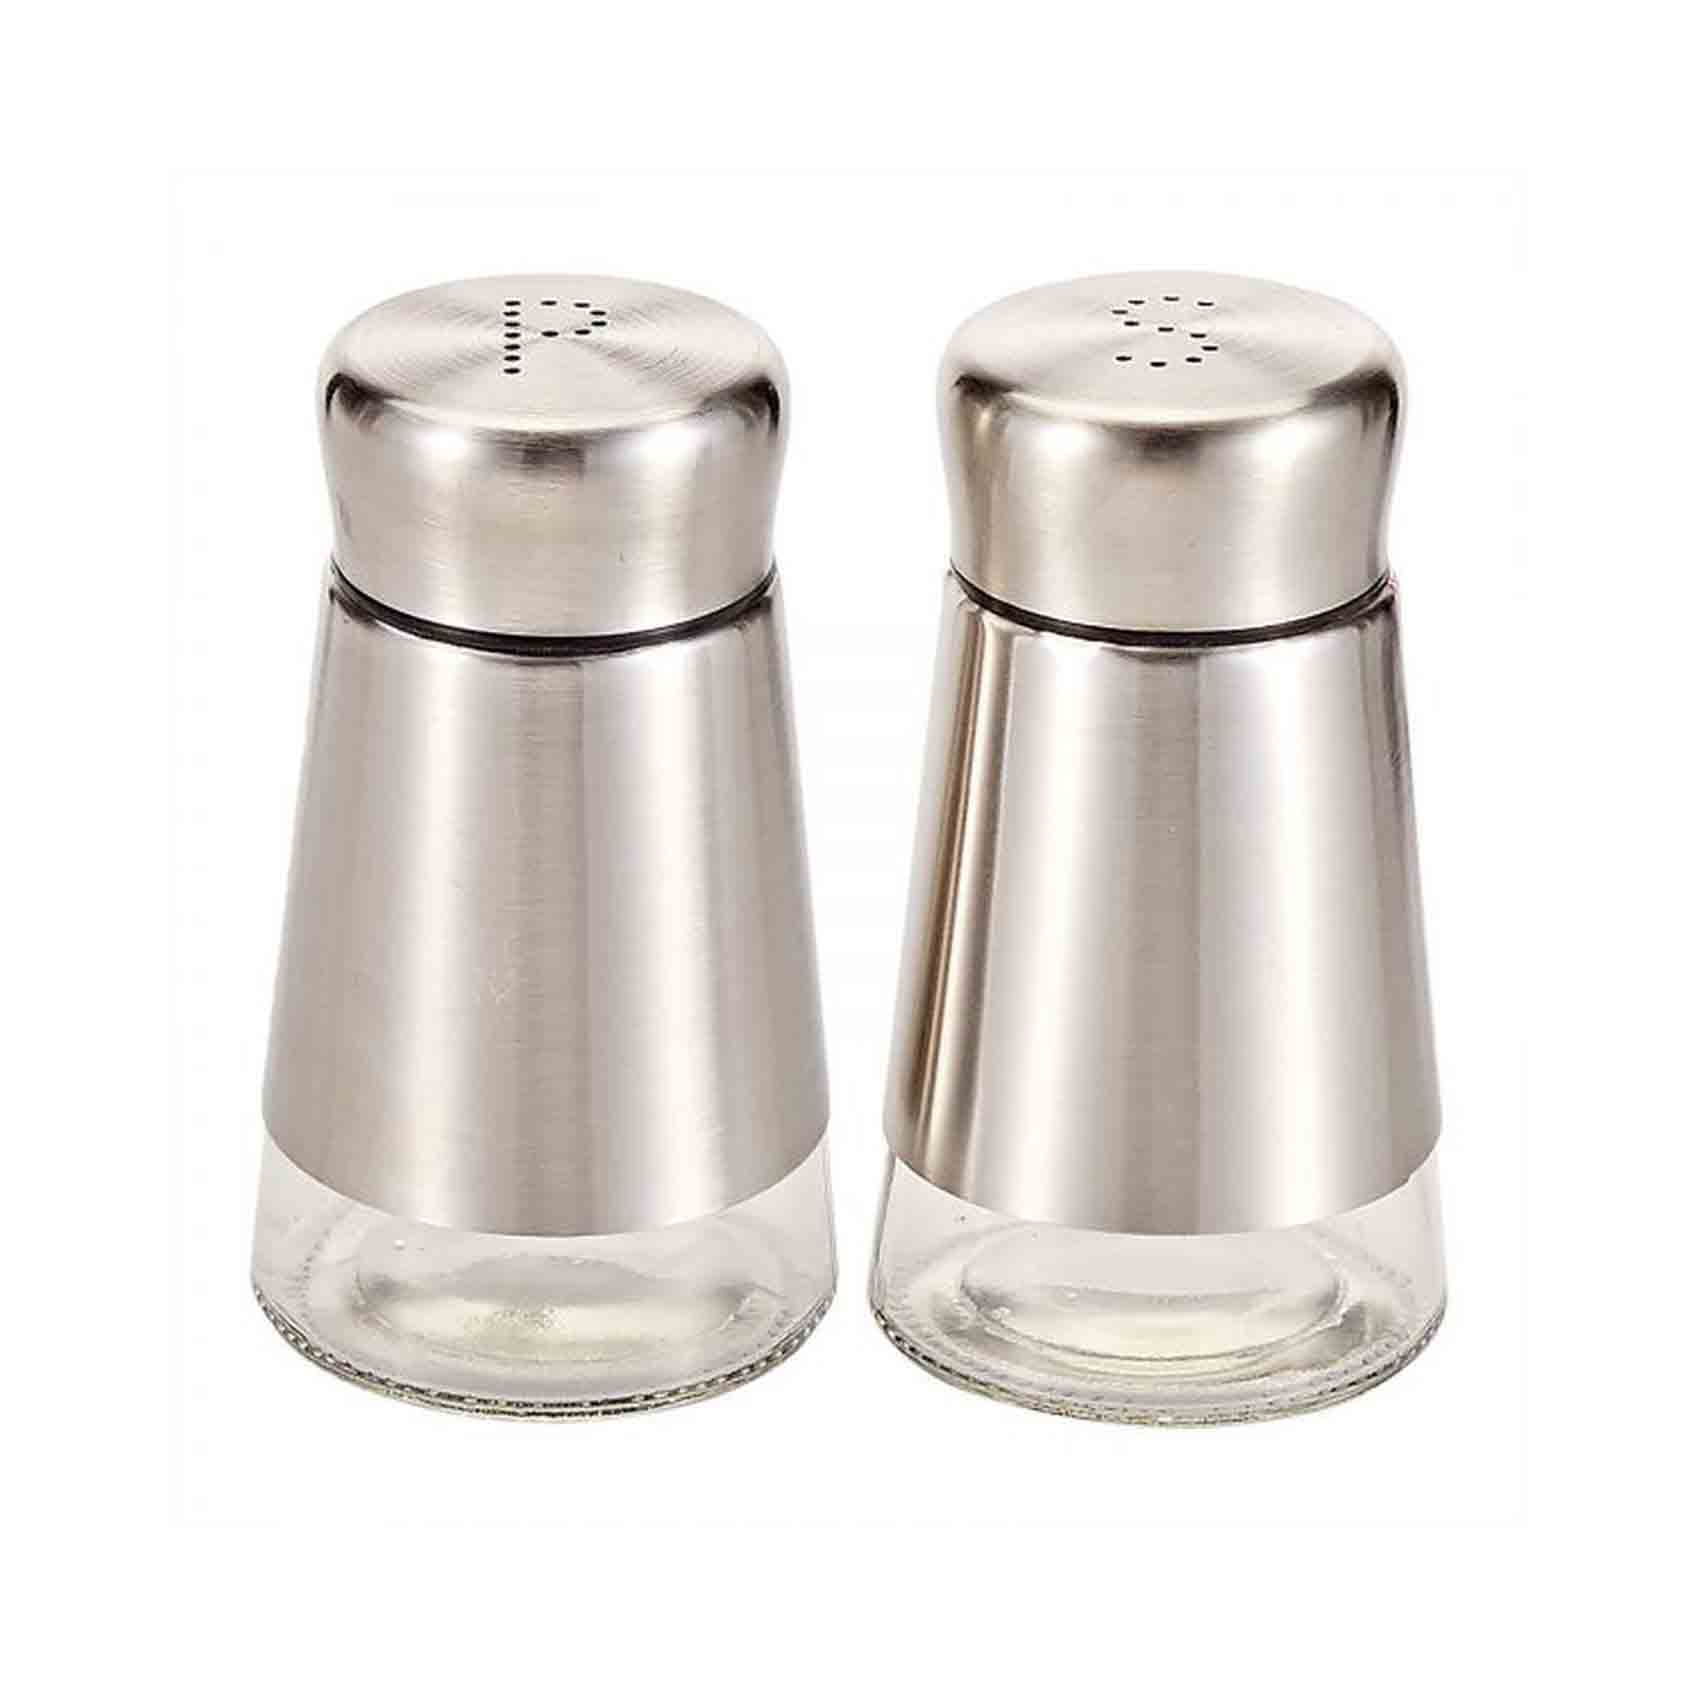 Harmony Table Top Salt And Pepper Shaker Silver 90ml 2 PCS